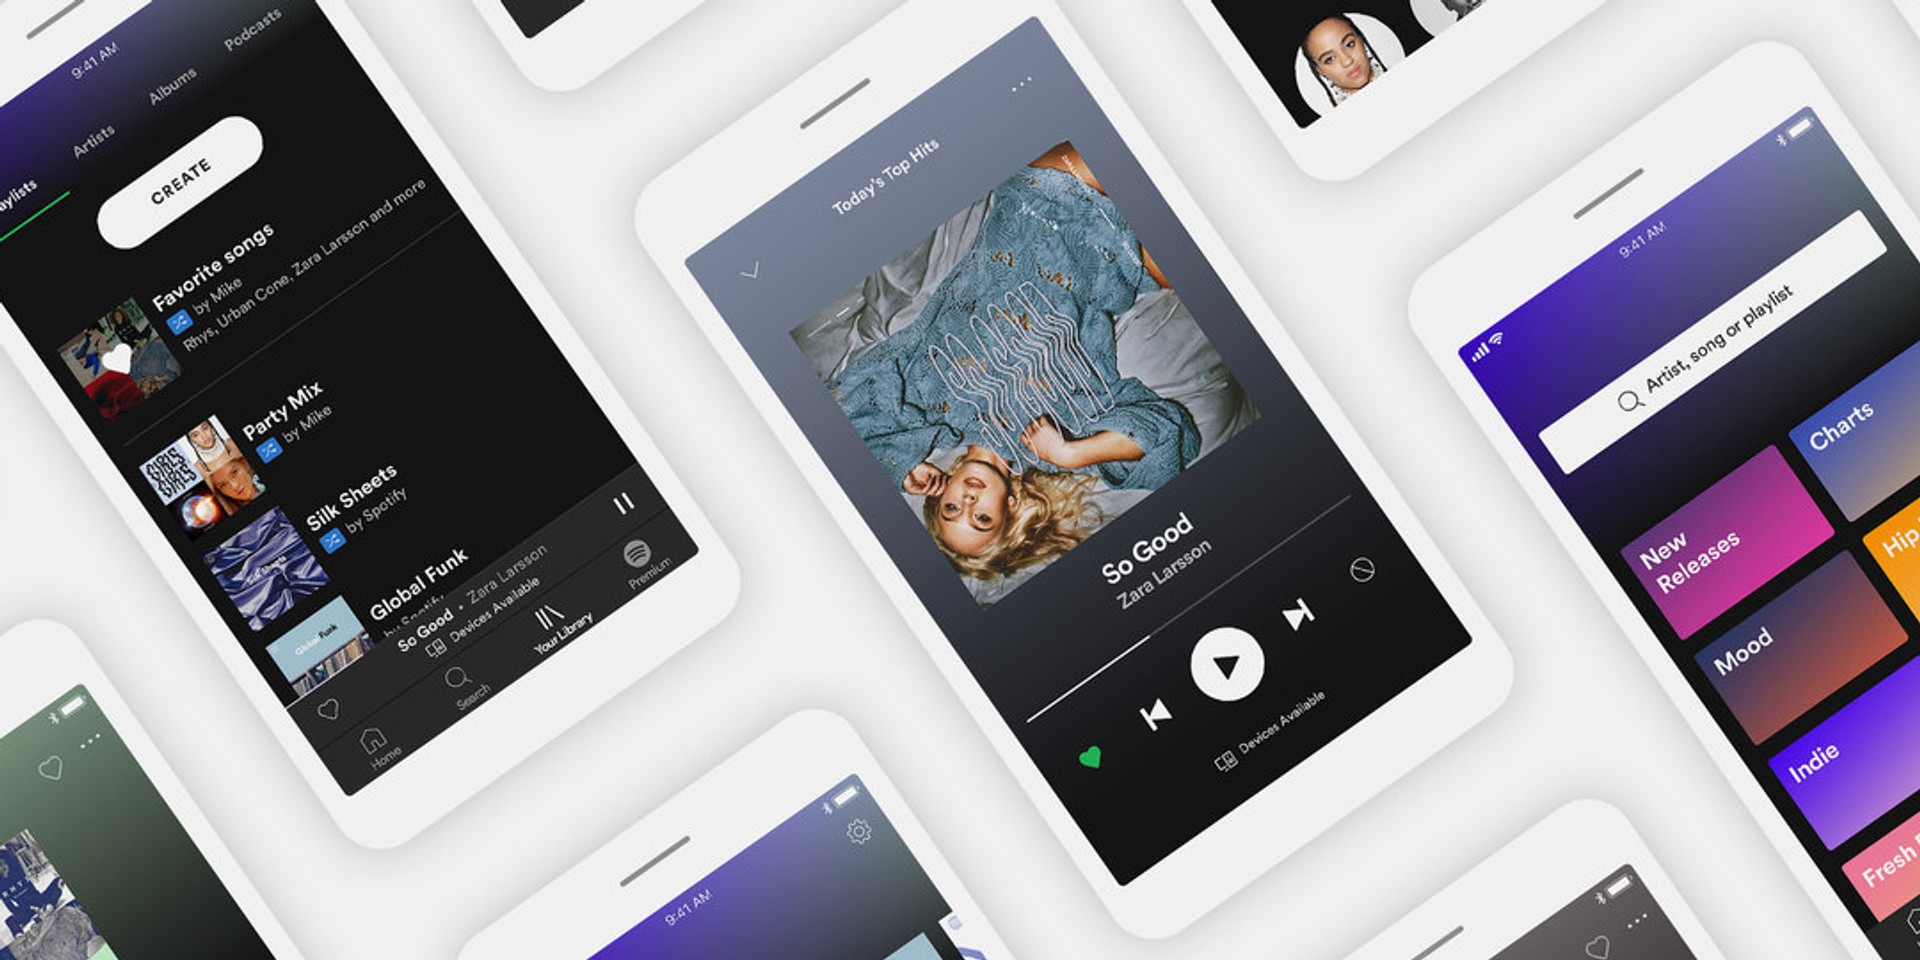 Your music library can now save over 10,000 songs as Spotify removes limit